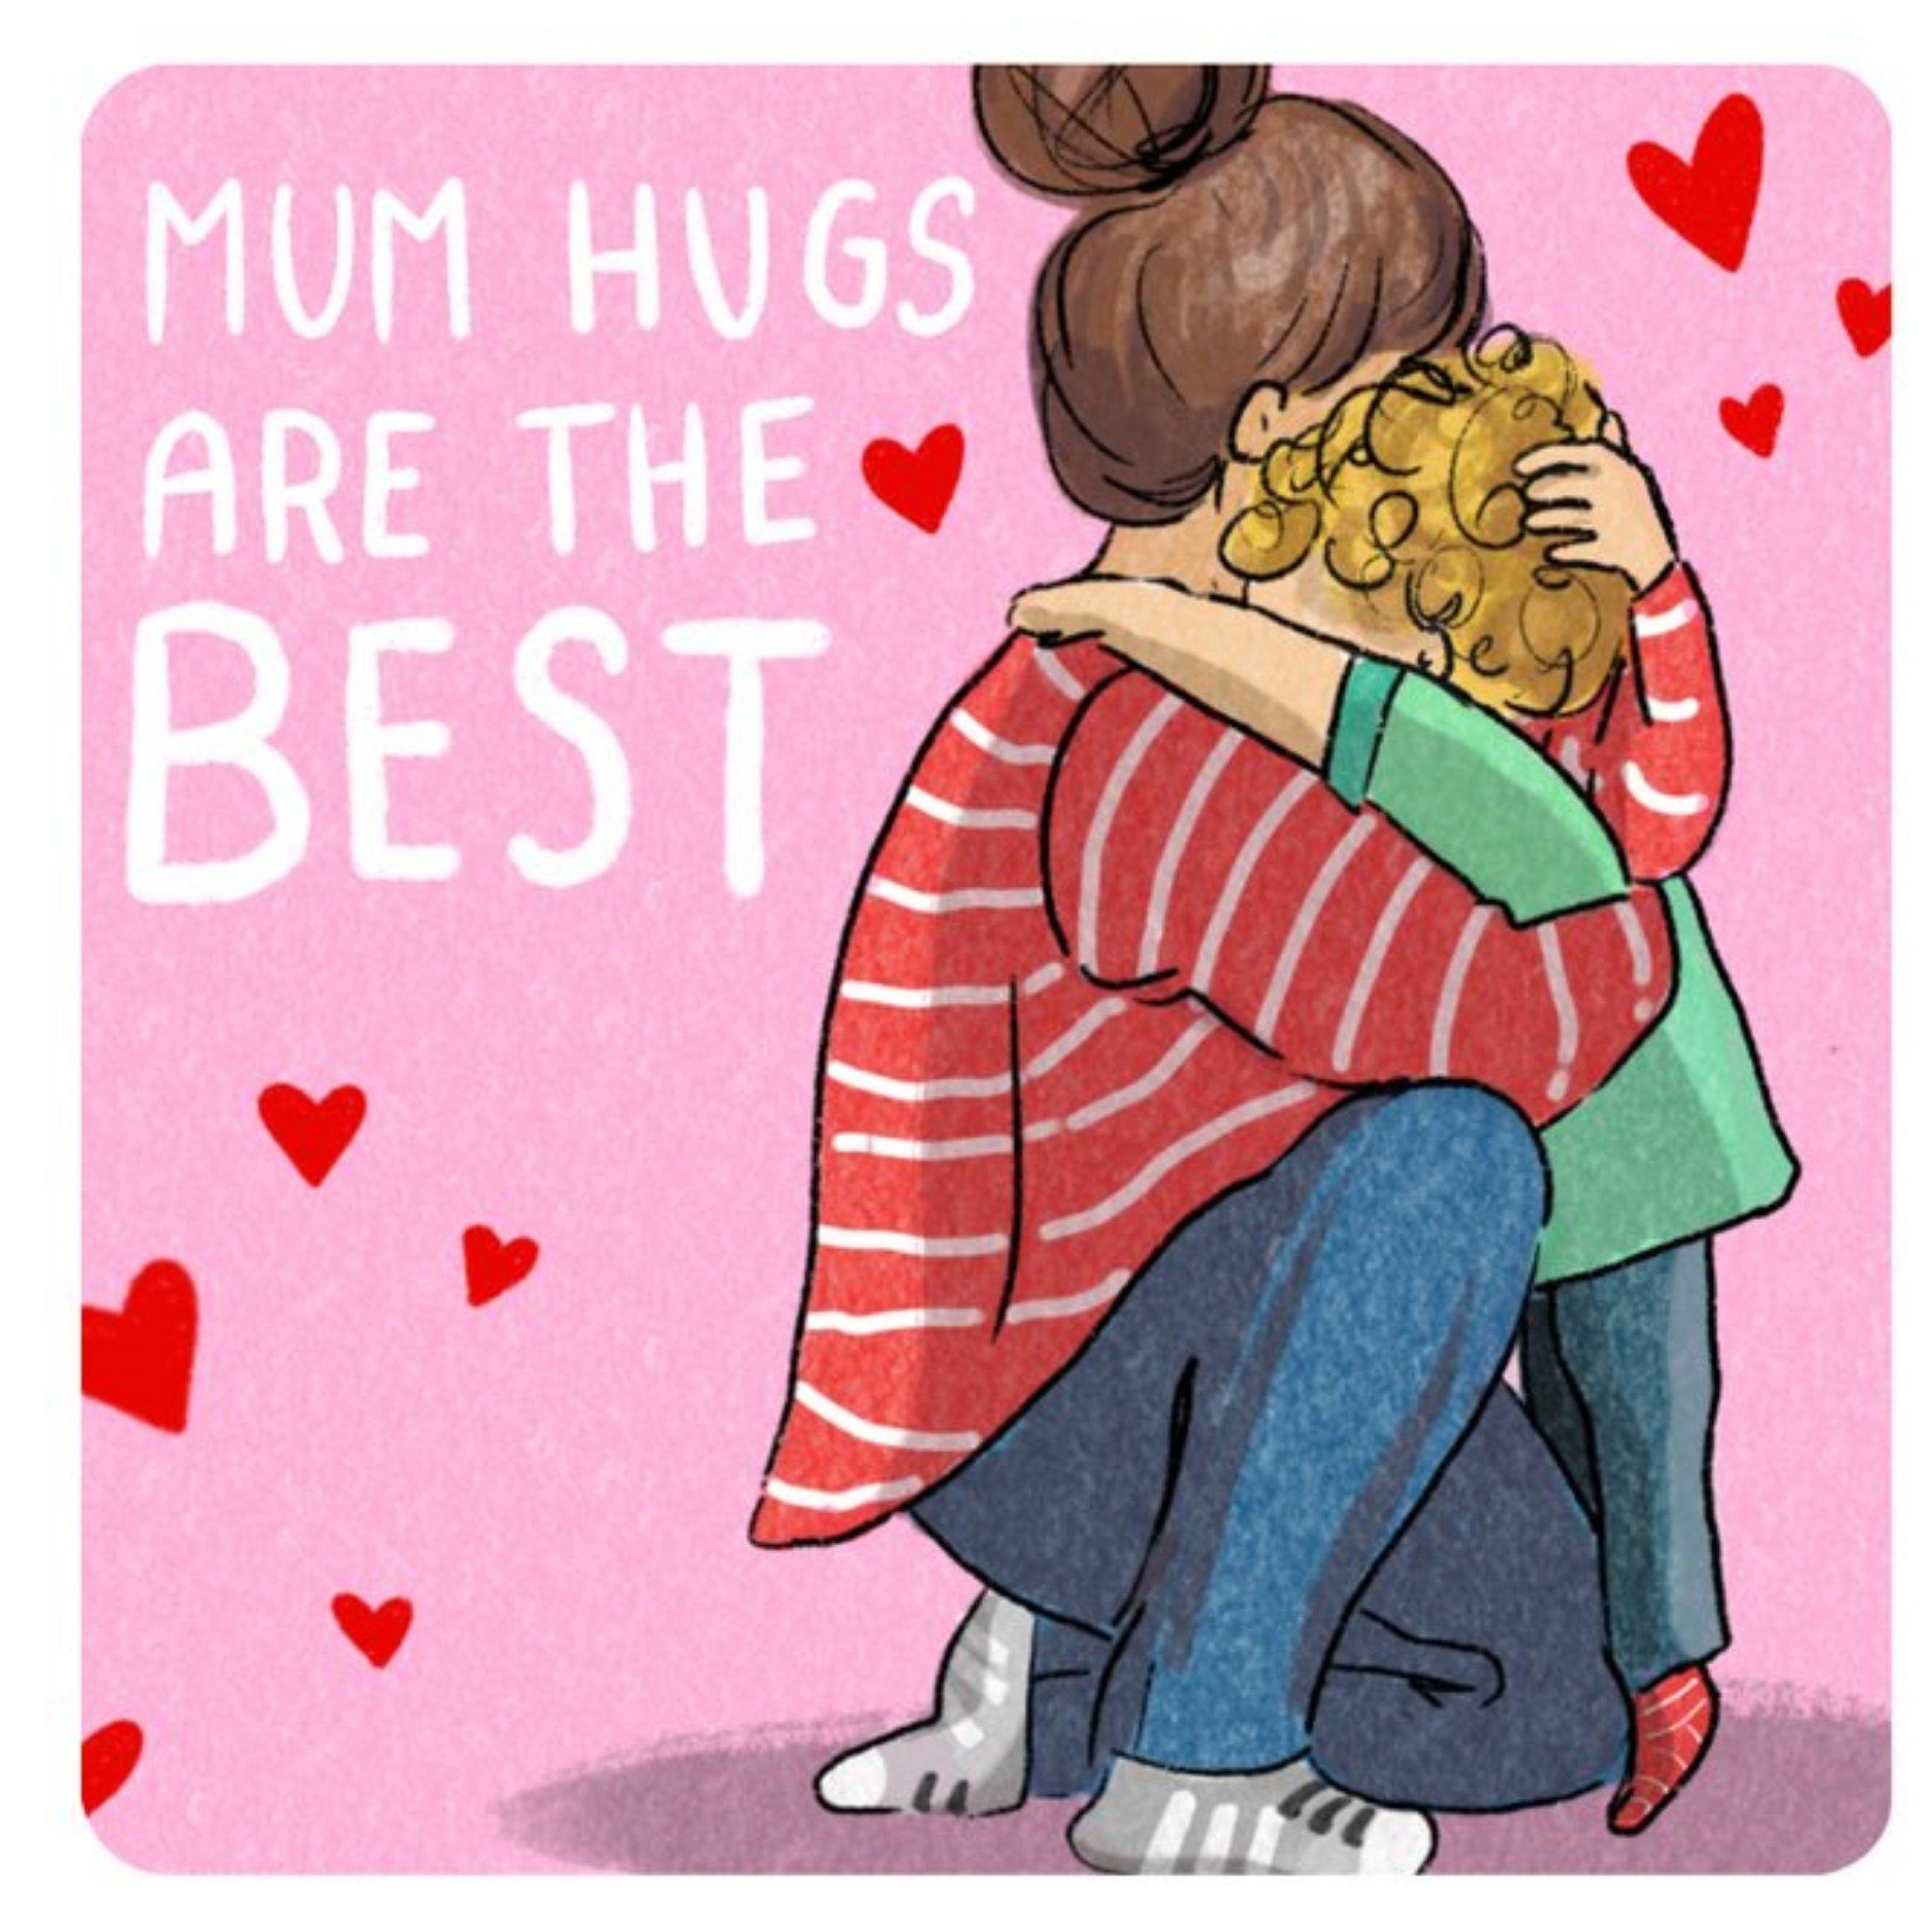 Moonpig Cake And Crayons Cute Illustrated Mum Hugs Thinking Of You Card, Square